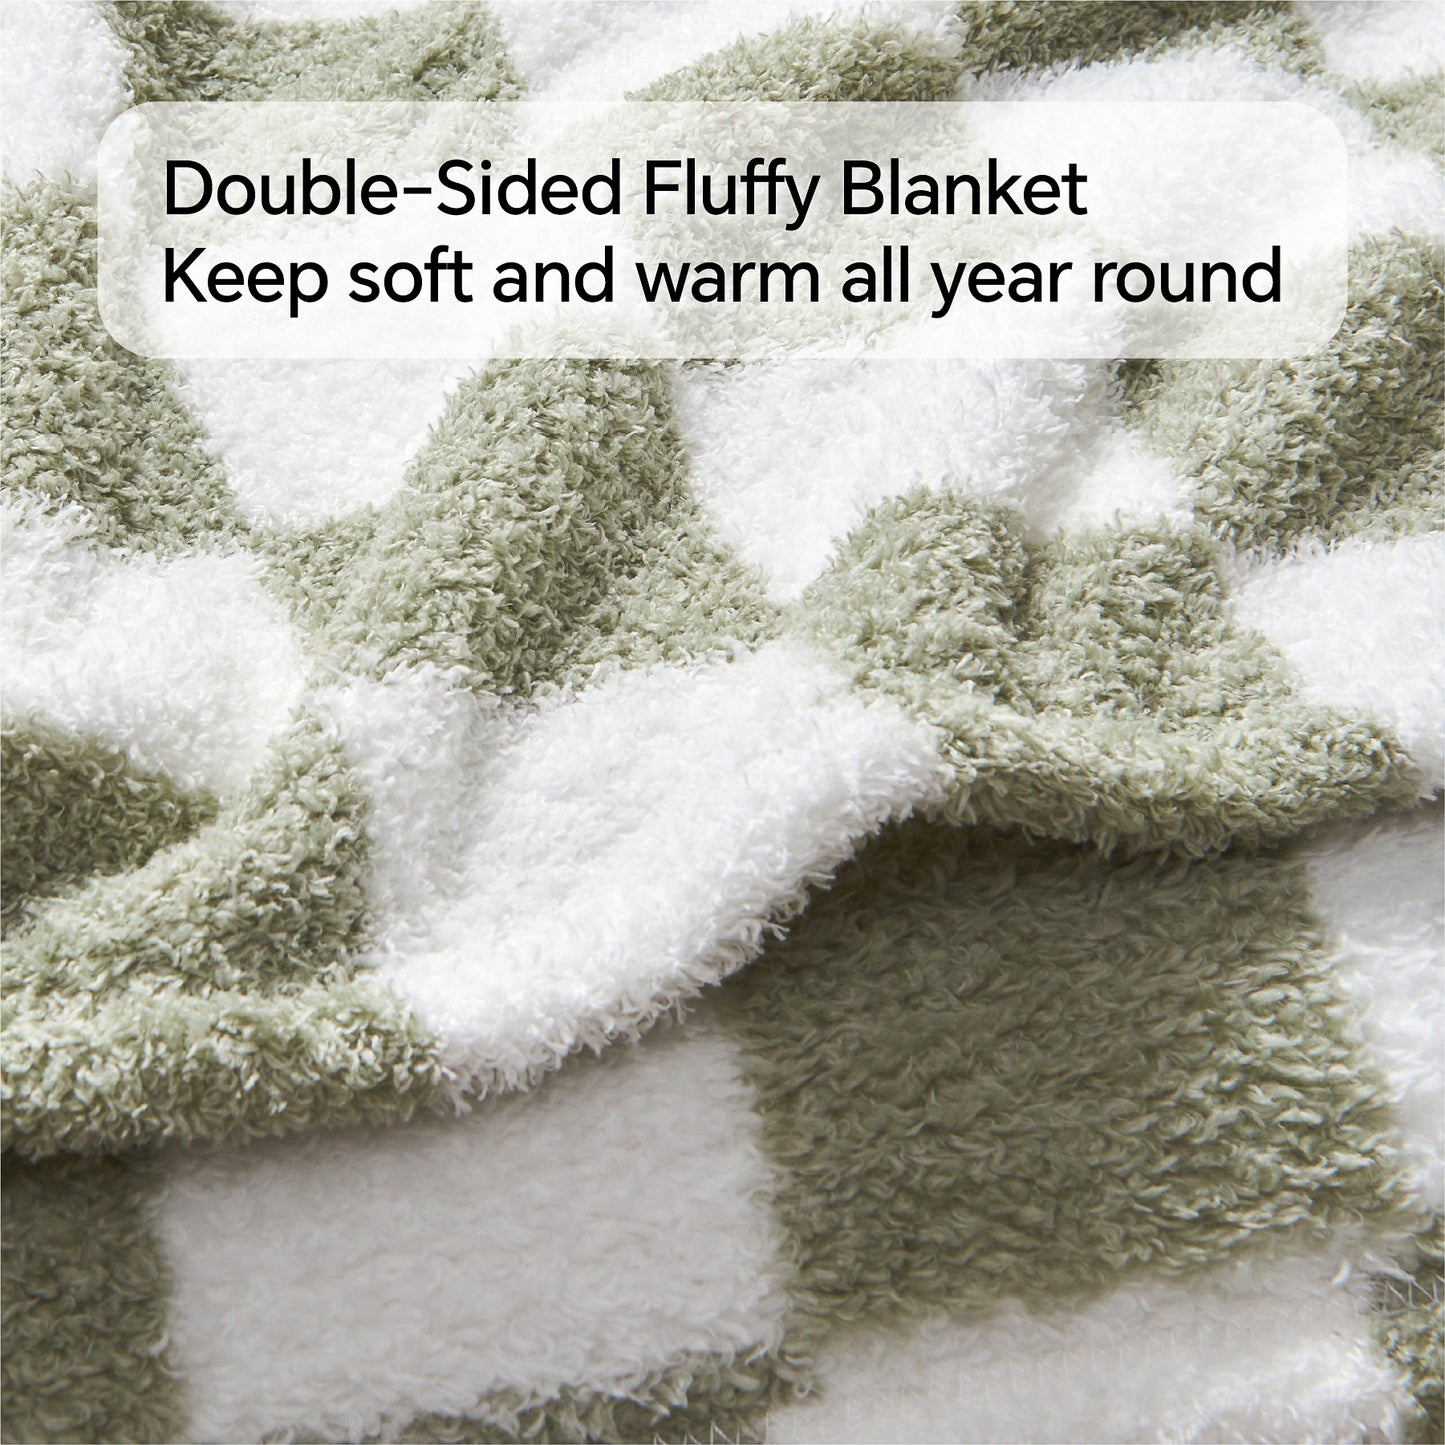 Checkered Blanket - Ultra Soft Cozy Knit Fluffy Blanket, 350GSM Thick Warm Winter Throw Blanket for Couch, Bed, Travel